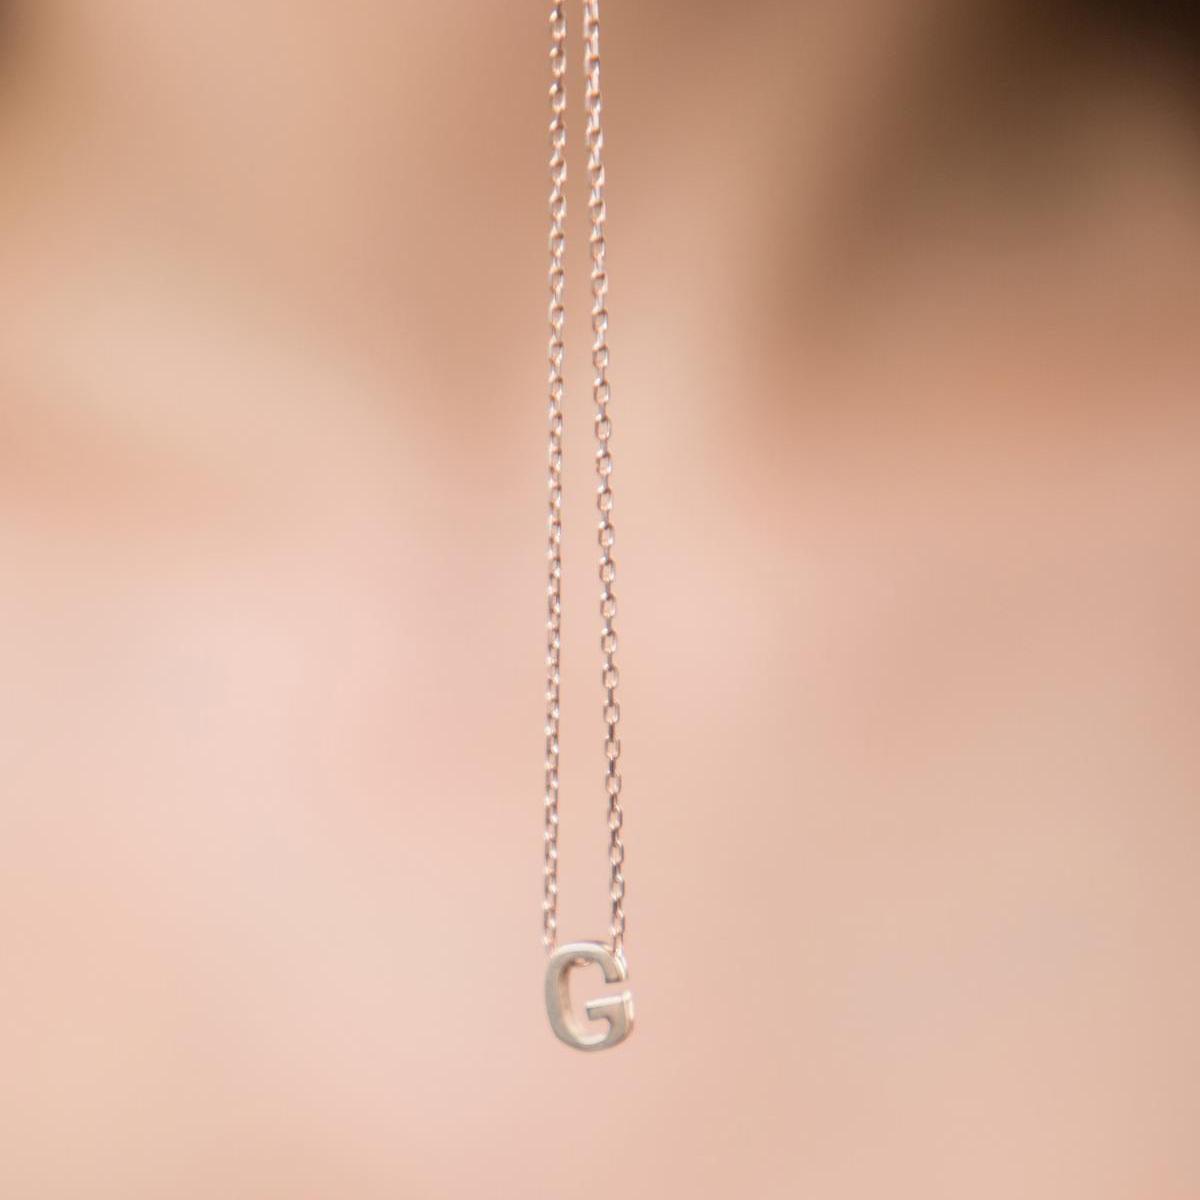 G Initial Necklace Gold • 14K Gold Initial Necklace • Gift For Her - Trending Silver Gifts